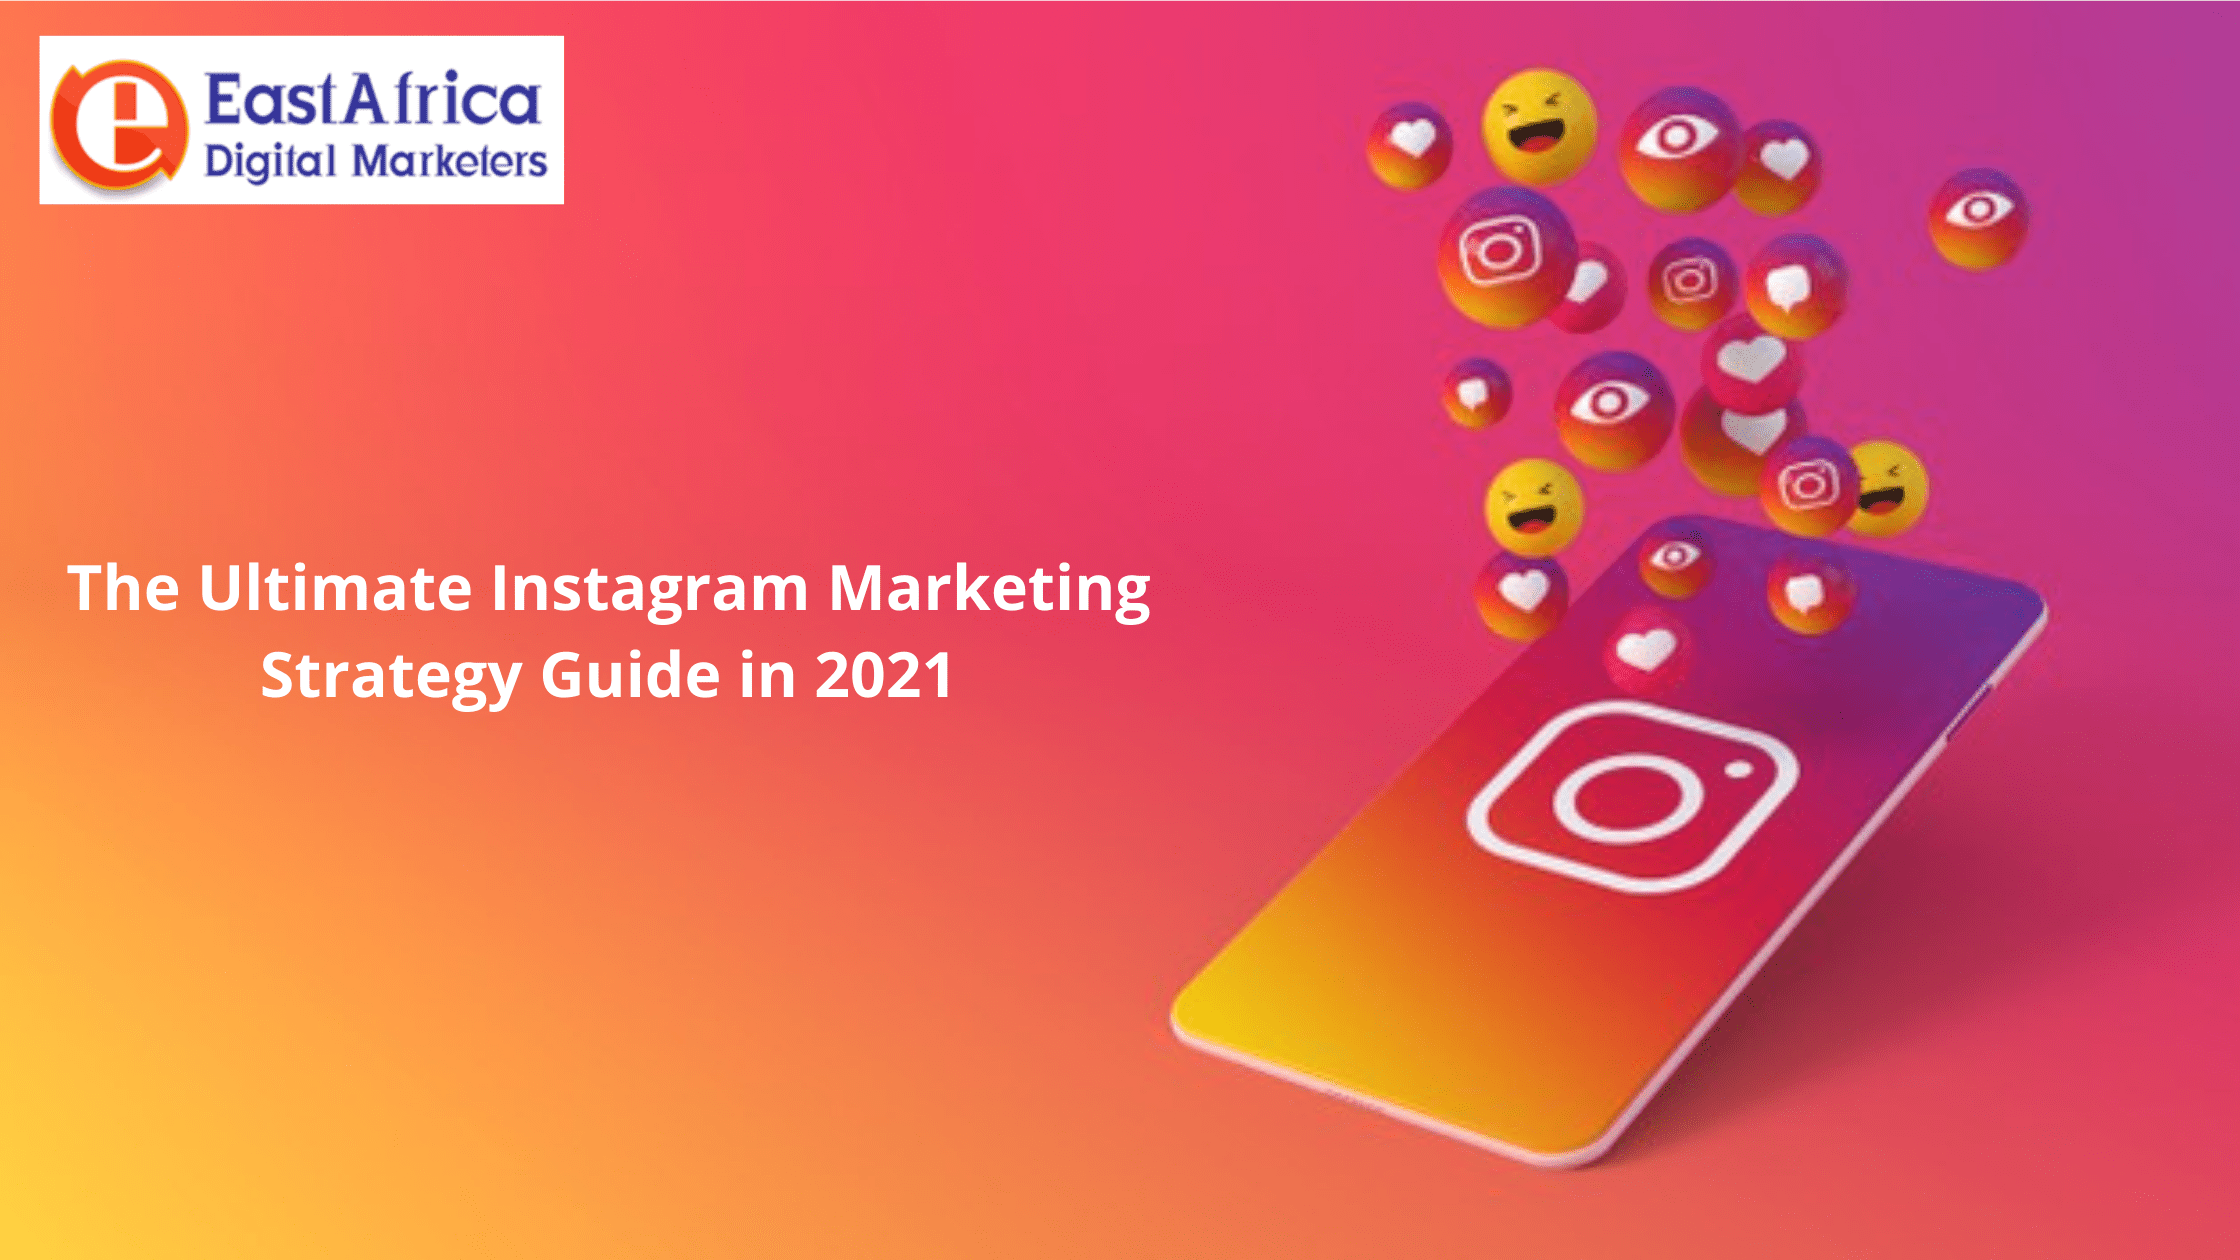 The Ultimate Instagram Marketing Strategy Guide in 2021